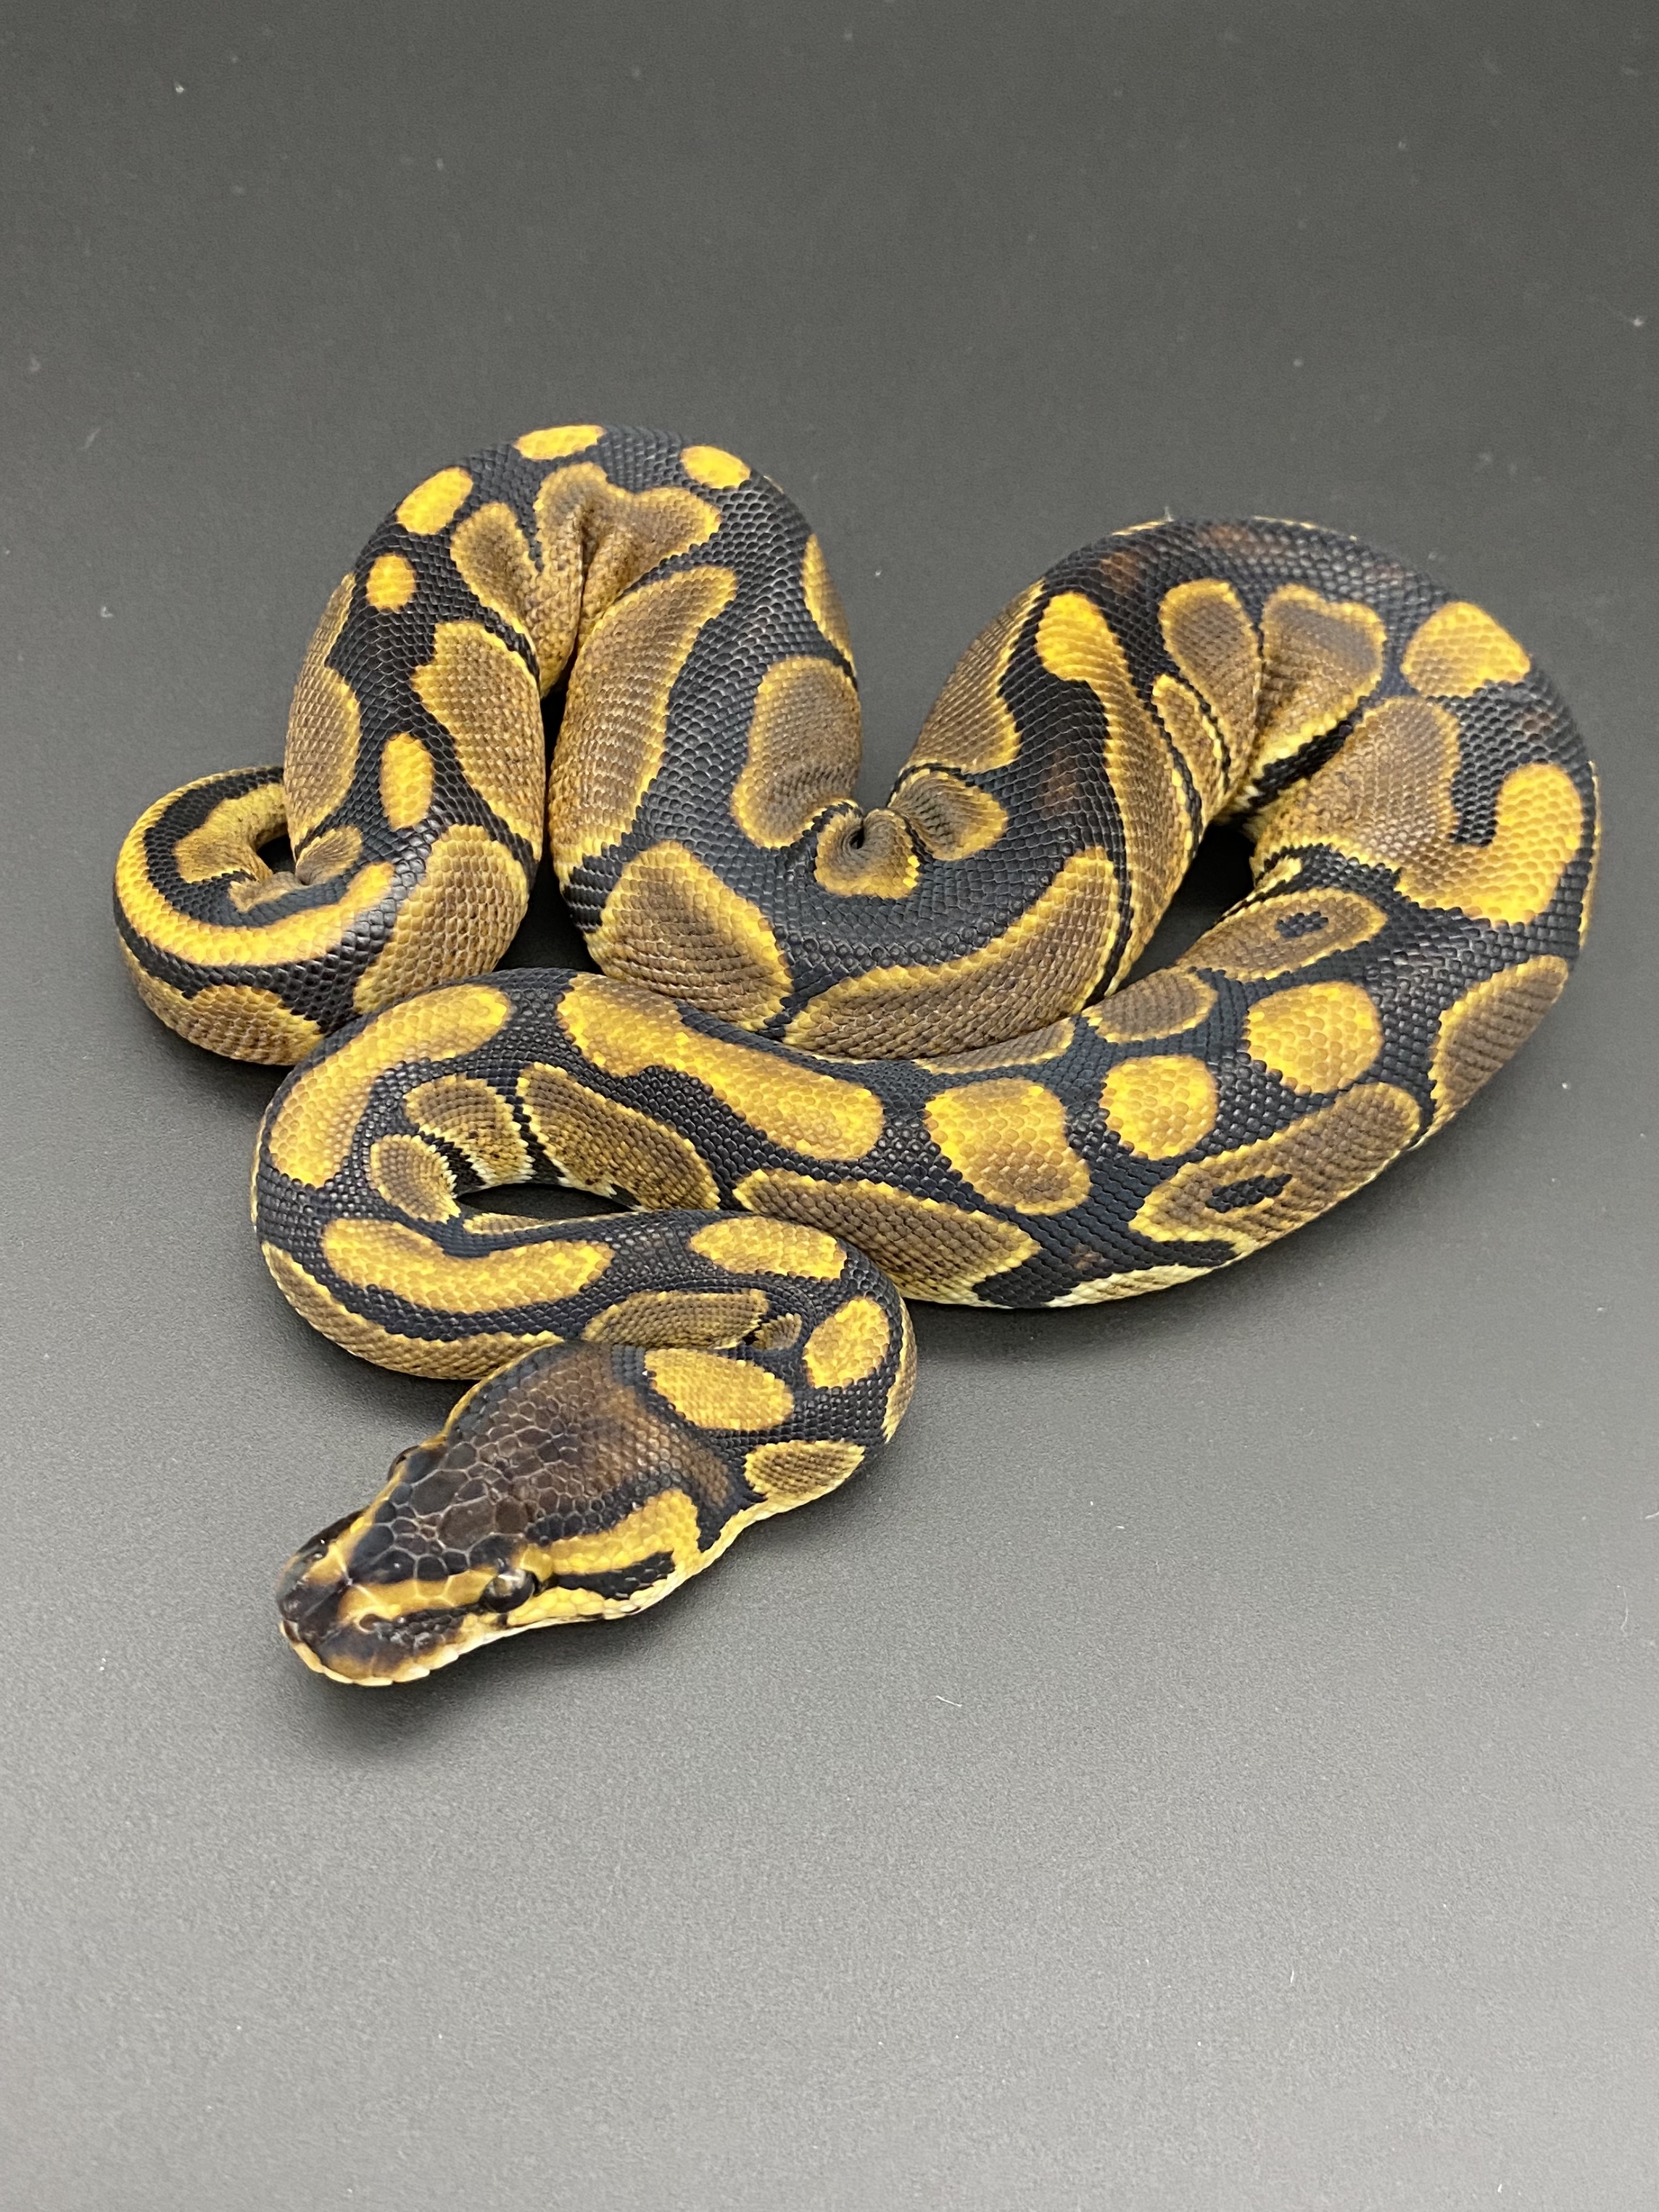 Genetic Black Back Ball Python by Drs Reptiles